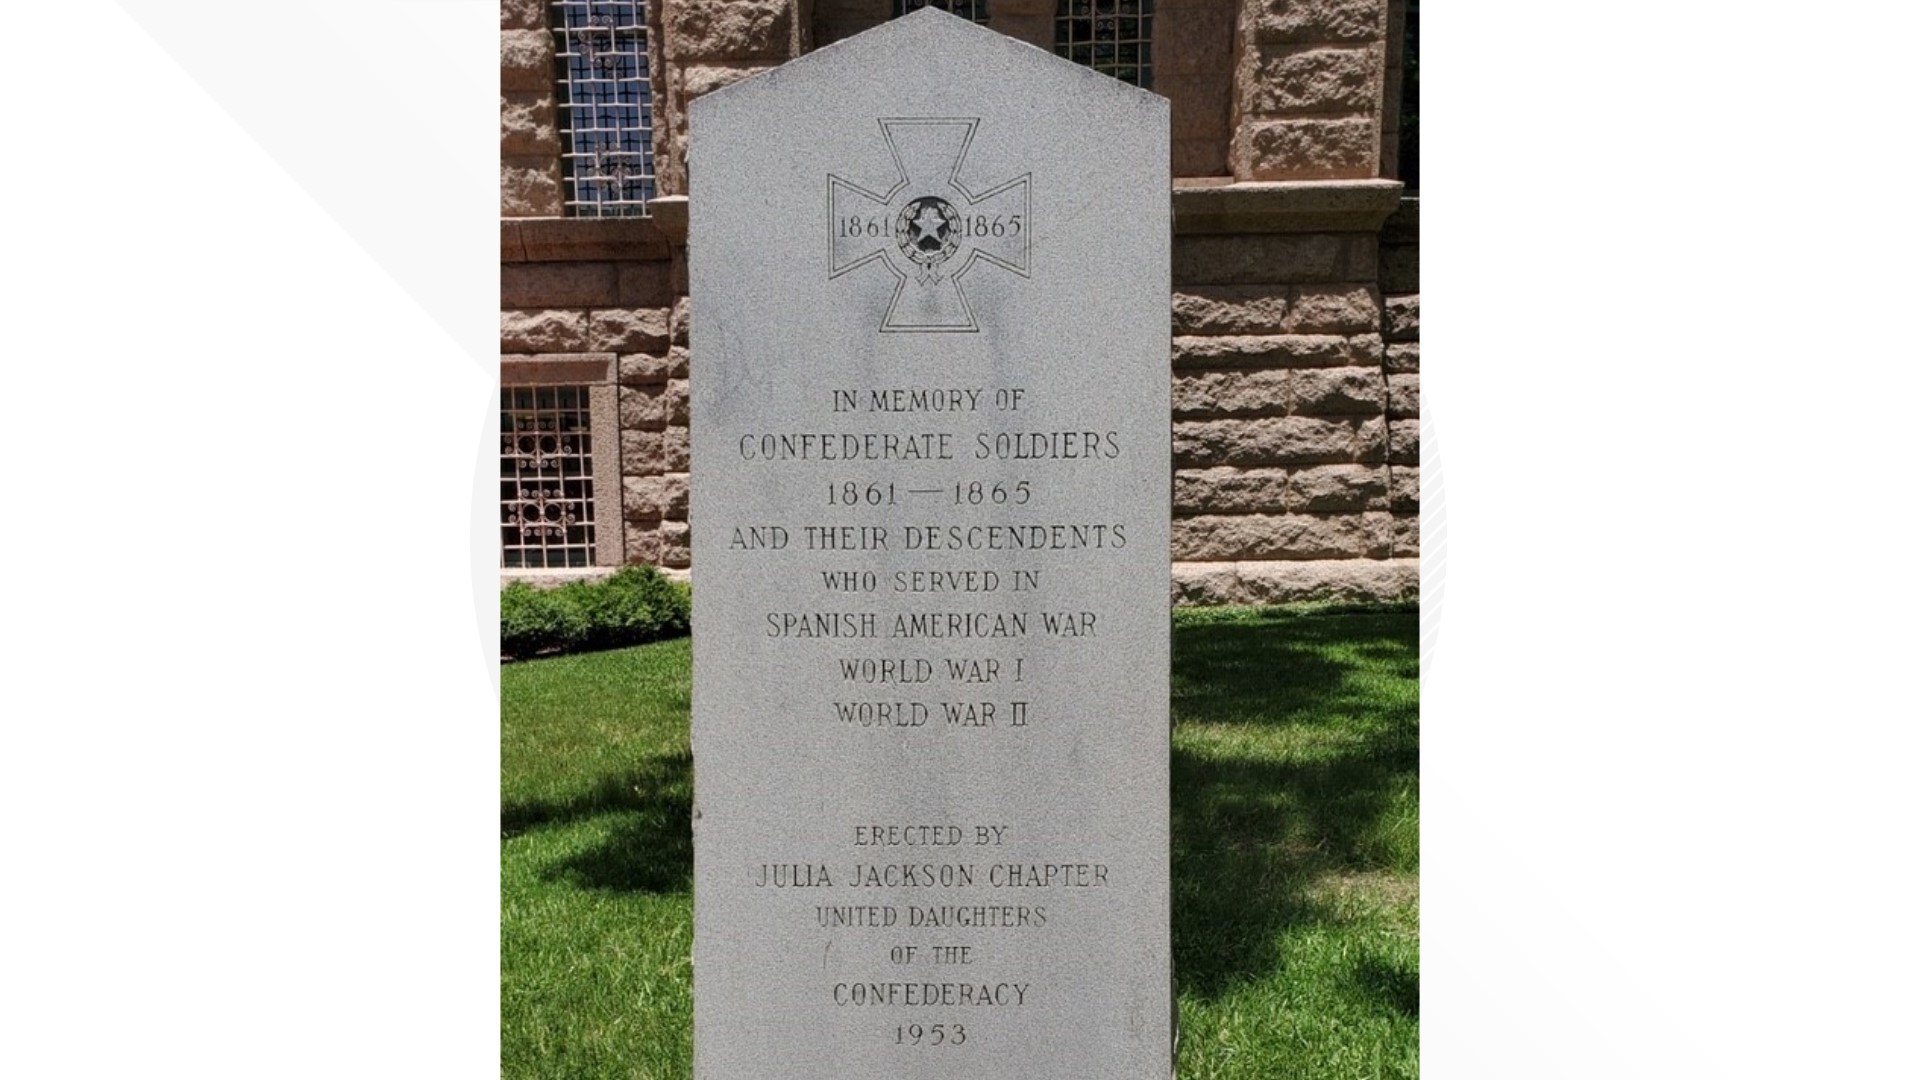 In a vote of 4-0, Tarrant County commissioners voted Tuesday to remove a monument erected by the United Daughters of the Confederacy.